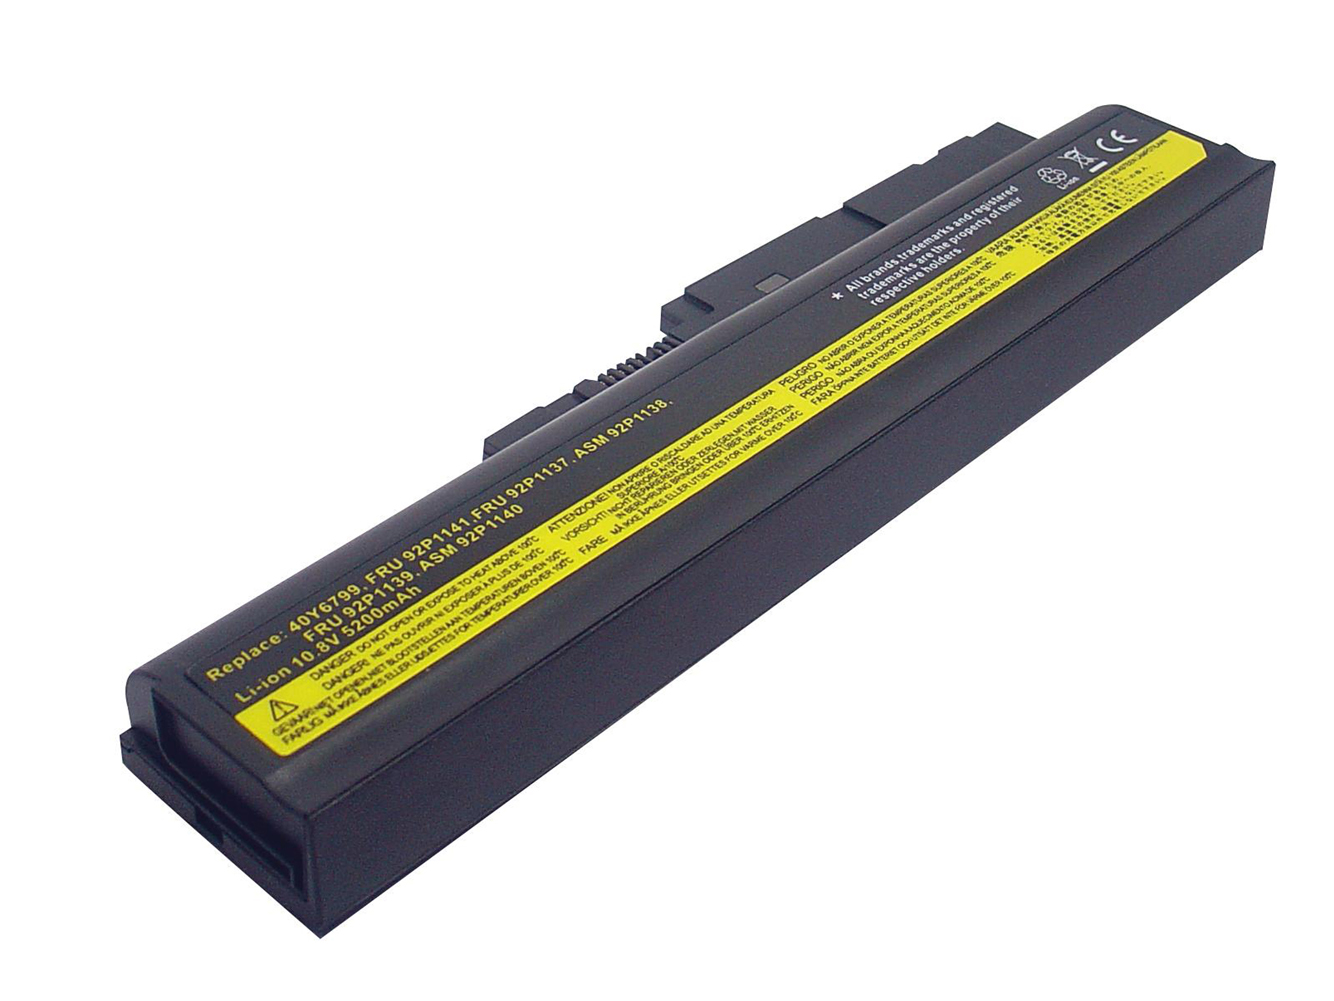 Replacement for LENOVO R500, Thinkpad R500, ThinkPad T500, Thinkpad W500, IdeaPad SL500, LENOVO ThinkPad R61, ThinkPad R61e, ThinkPad R61i, ThinkPad T61, ThinkPad T61p Series Laptop Battery